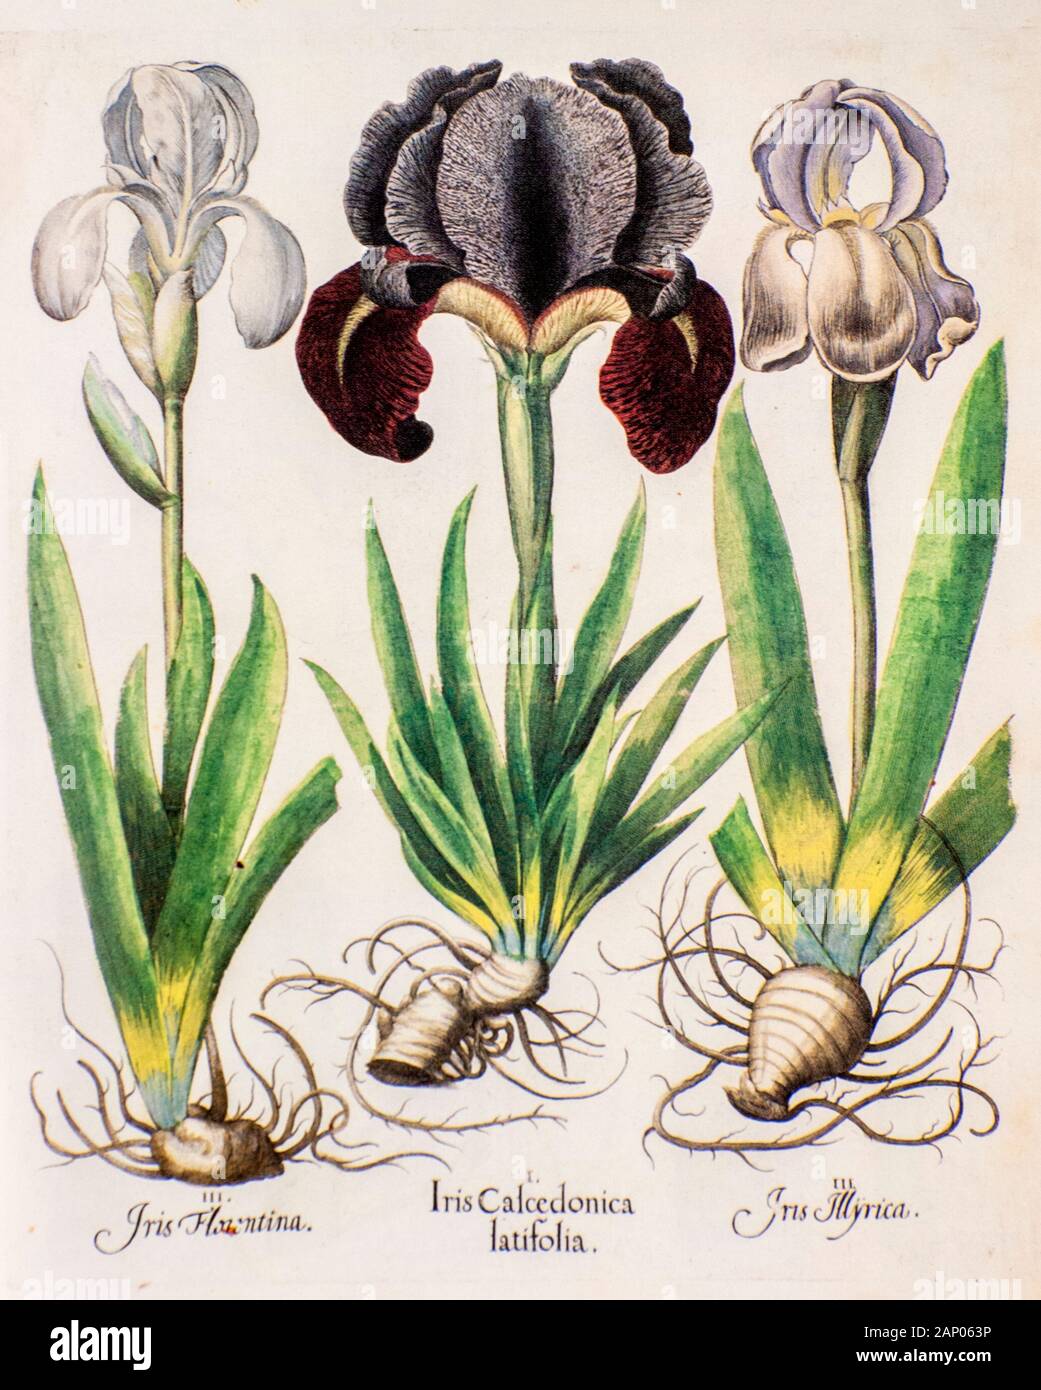 Three iris plants from Hortus Eystettensis a codex produced by Basilius Besler in 1613 of the garden of the bishop of Eichstätt in Bavaria. Stock Photo